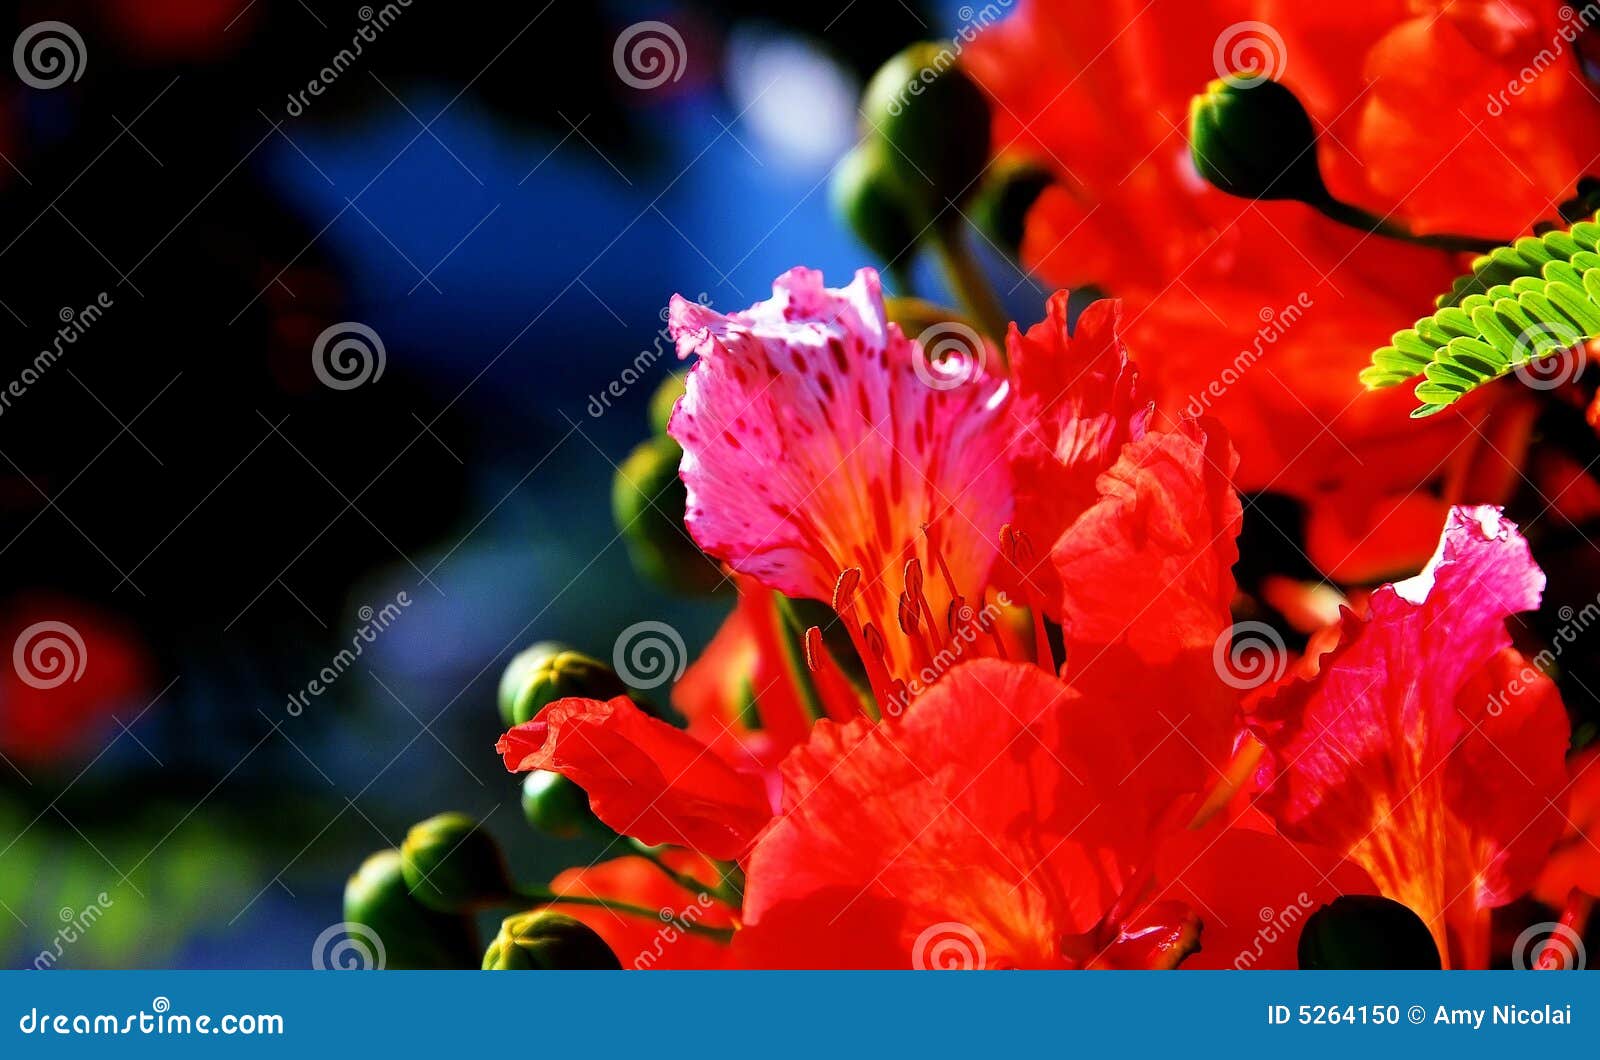 Poinciana, Tree, Royal, Flamboyant, Flame, Sky, Flower, Blue, Delonix,  Gulmohar, Peacock, Nature, Red, Beautiful, Colorful, Bright, Leaves, Flora,  Background, Bloom, Ornamental, Trees, Jardines, Beauty, Green, Summer,  Natural, Plant, Orange, Tropical ...